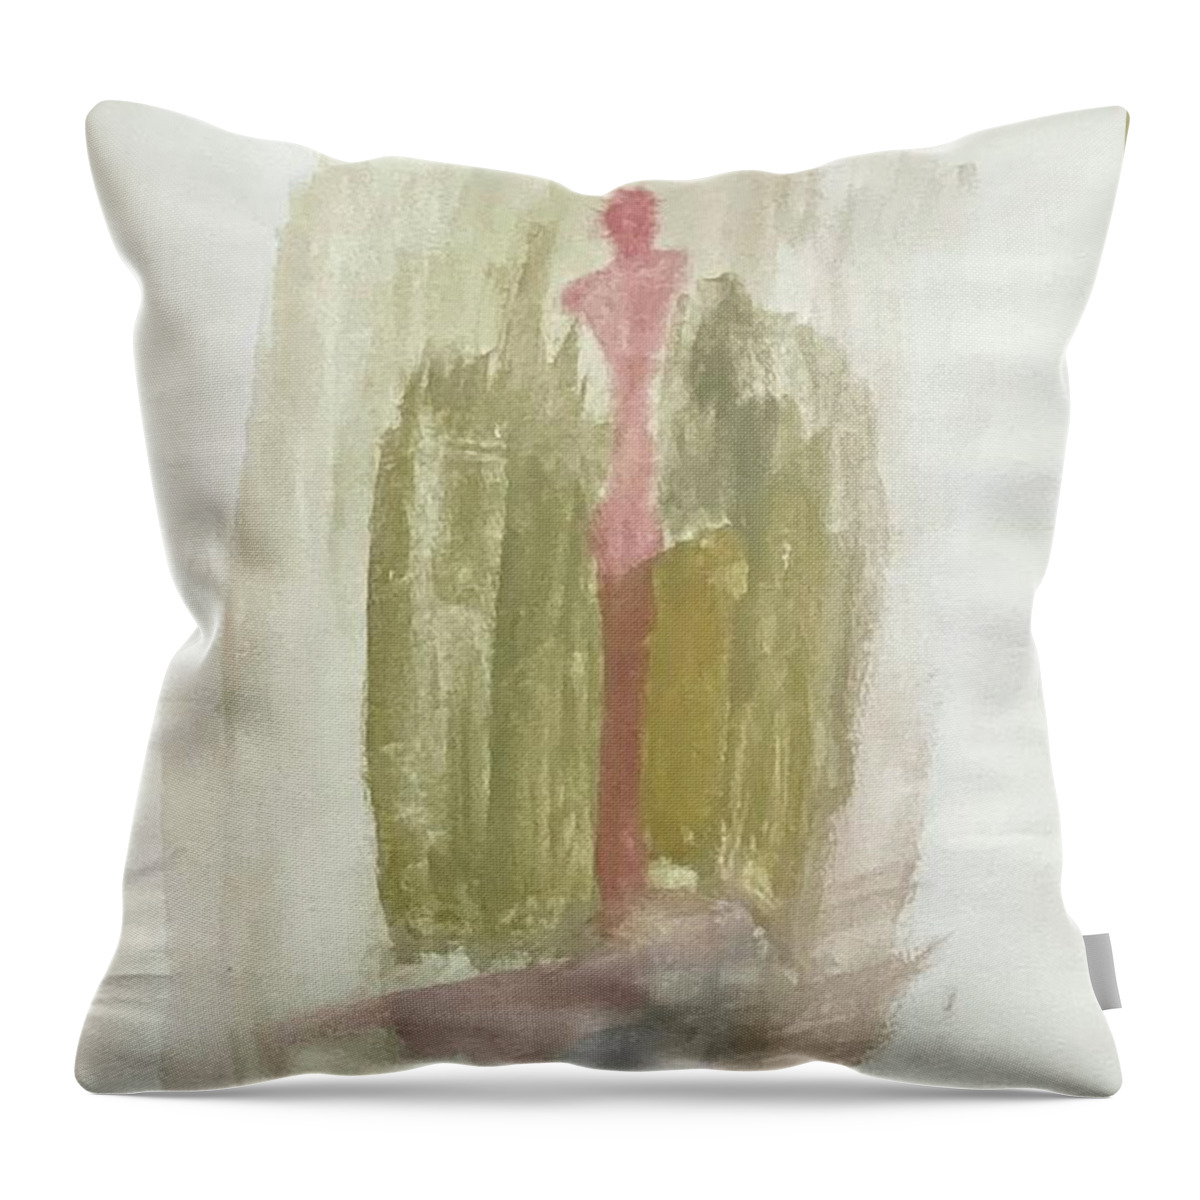 Silhouettes Throw Pillow featuring the painting Silhouettes VI by David Euler